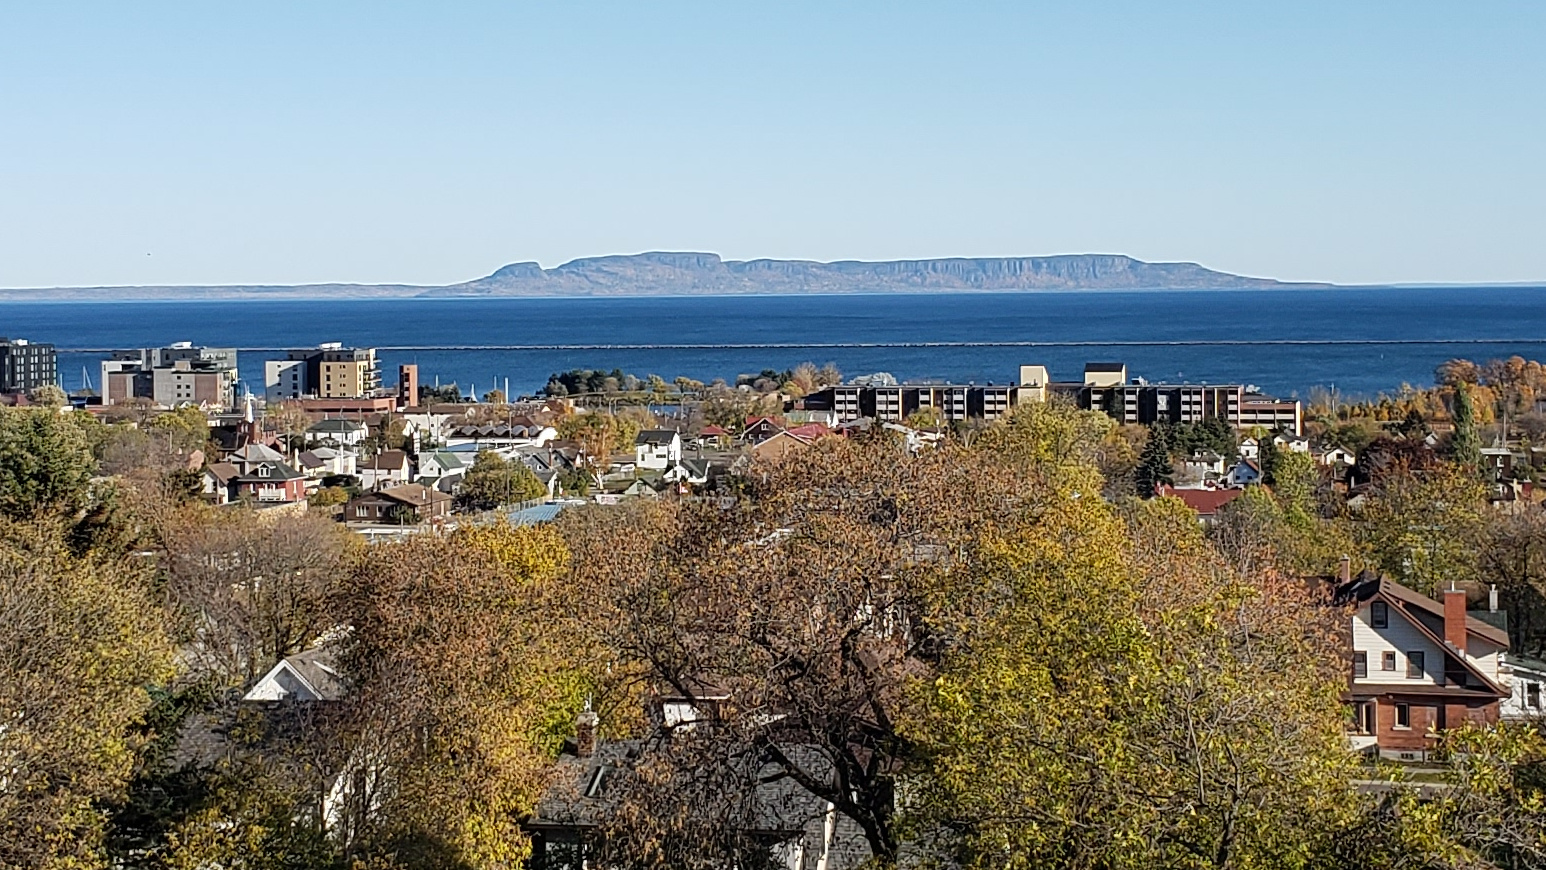 Photo of the Sleeping Giant in Thunder Bay, ON as seen from Hillcrest Park